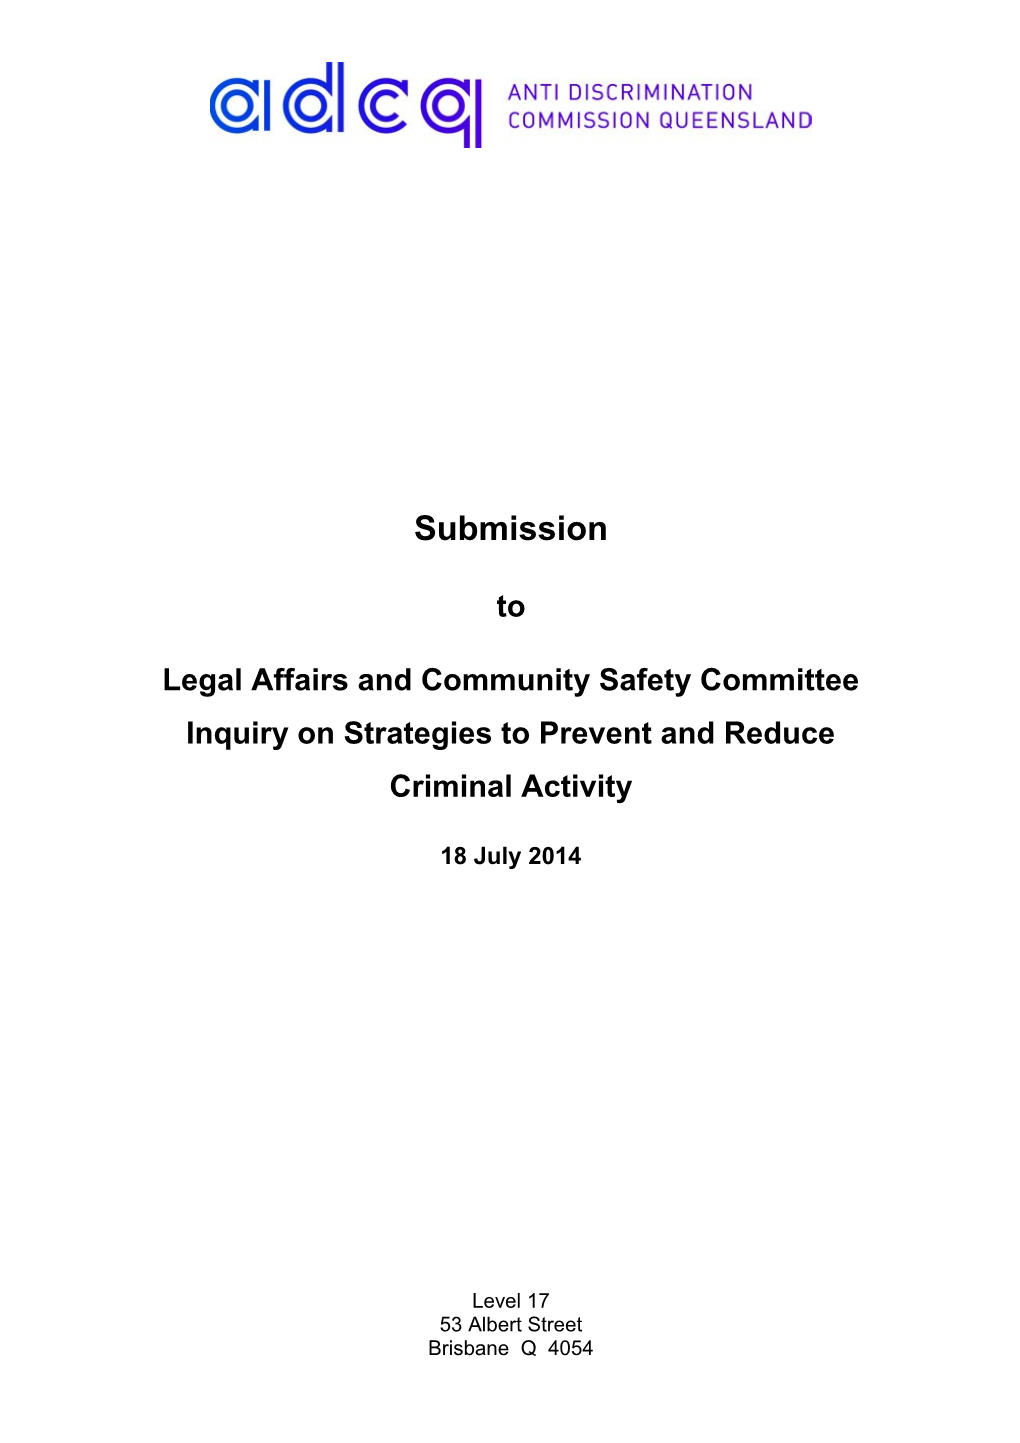 Crime Prevention Justice Reinvestment Submission